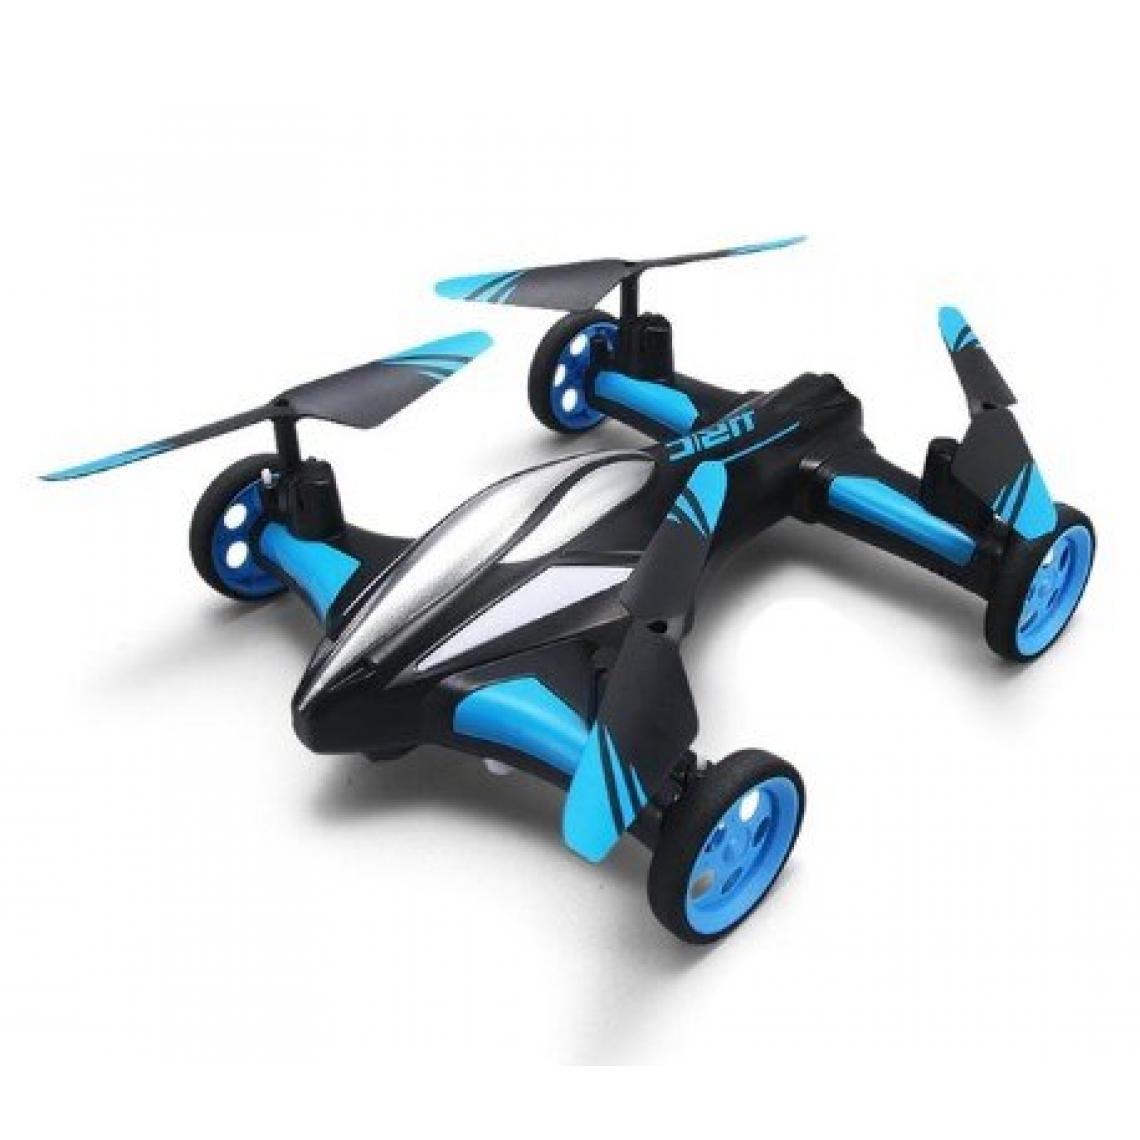 Universal - 2.4G RC Drone Air-Ground Flying Car H23 Quadcopter With Light Color Remote Control Model Helicopter Best Toy | RC Helicopter(Le noir) - Drone